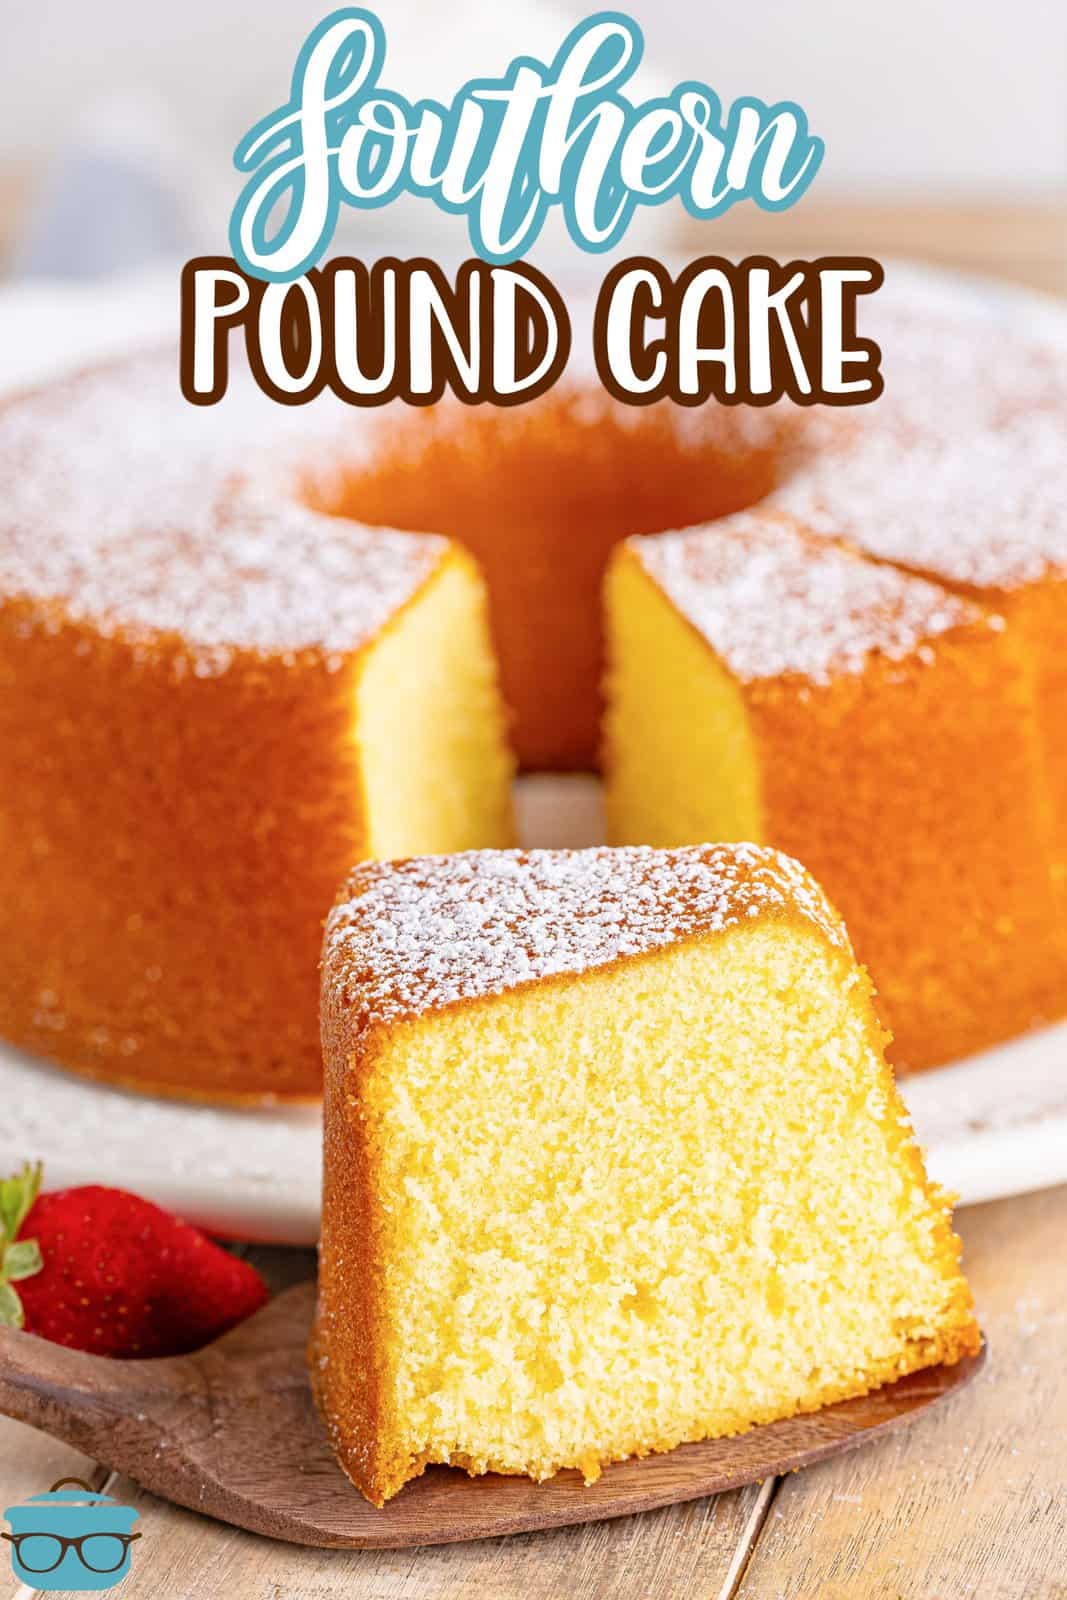 A slice of Southern Pound Cake sitting in front of the rest of the cake.